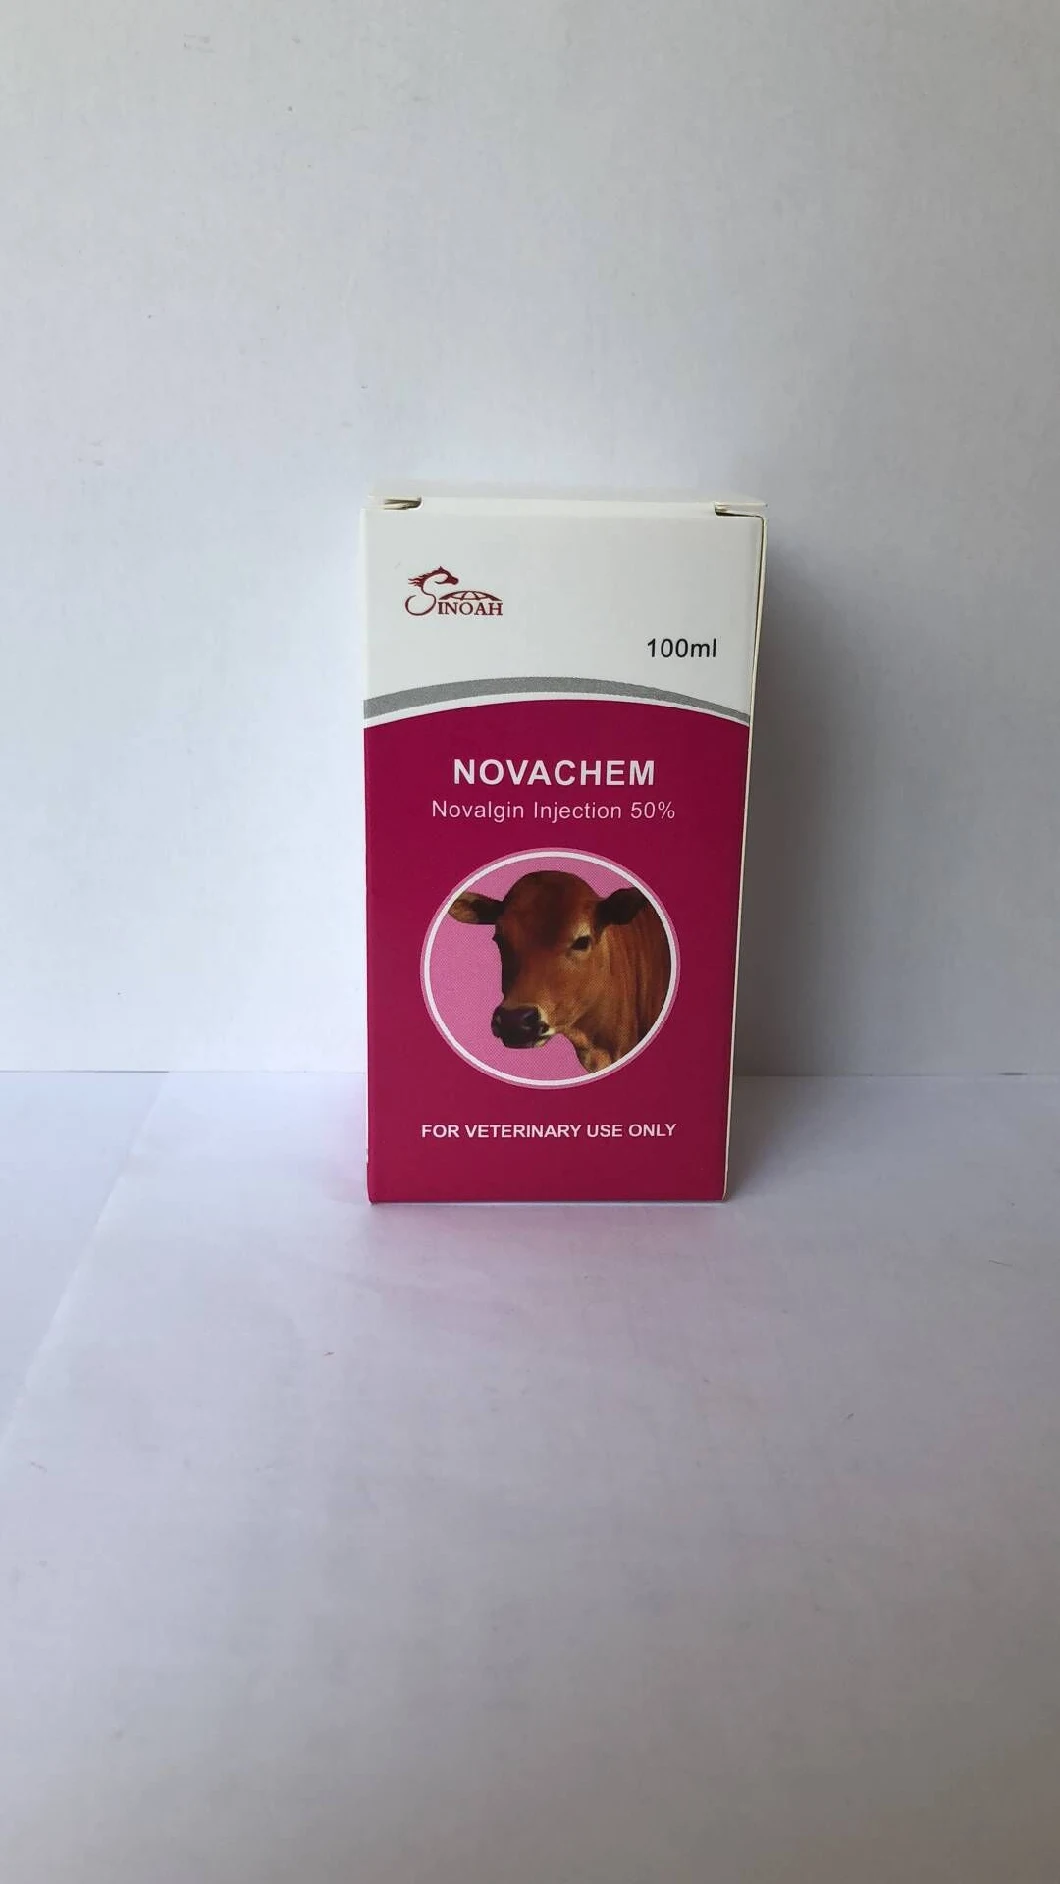 Metamizole Sodium Injection 30% for Veterinary Use Only